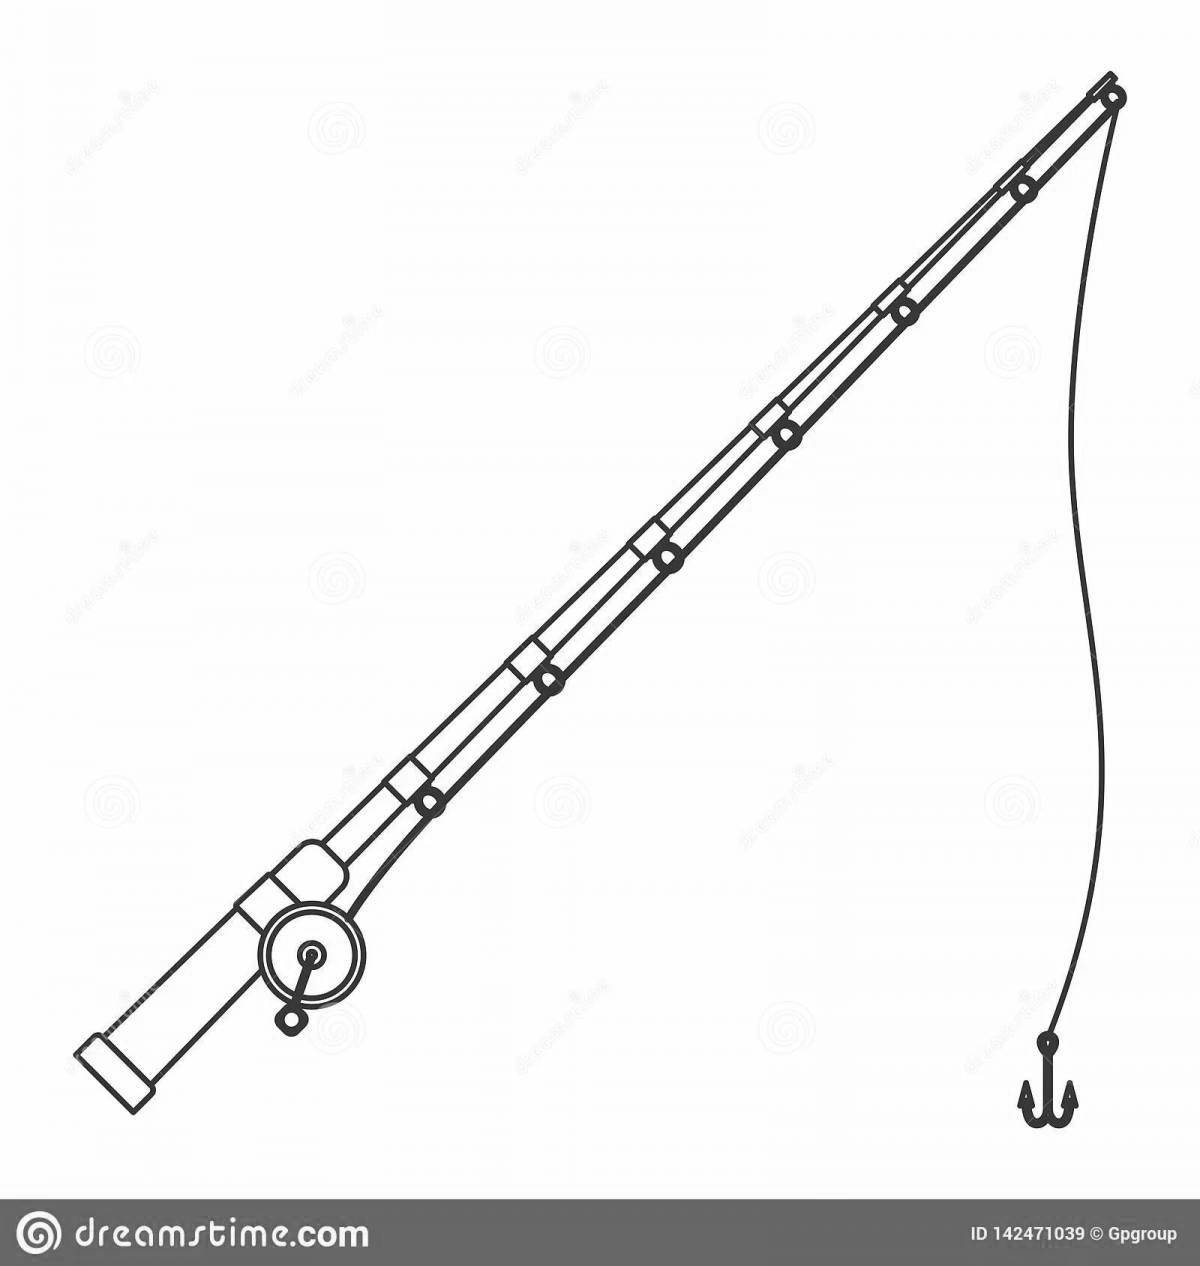 Funny fishing rod coloring page for kids